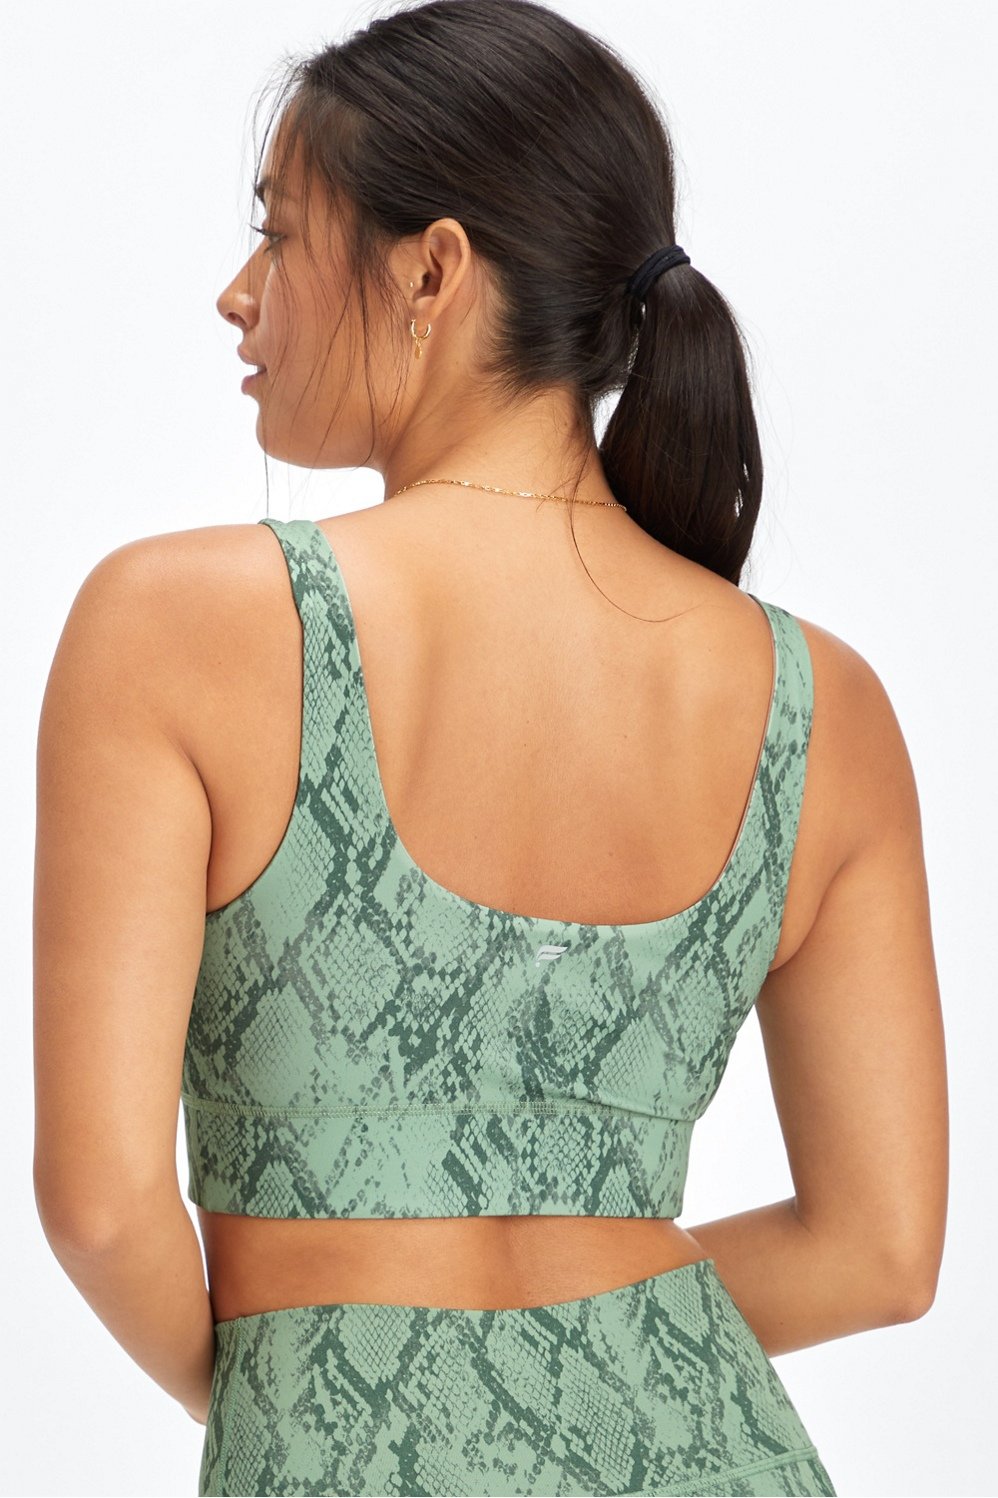 Kydra Athletics - Hey there, Delilah! We're all for functional back details  - breathability and style. The Delilah Bra's no different. What's more,  spice up your wardrobe with a pop of colour